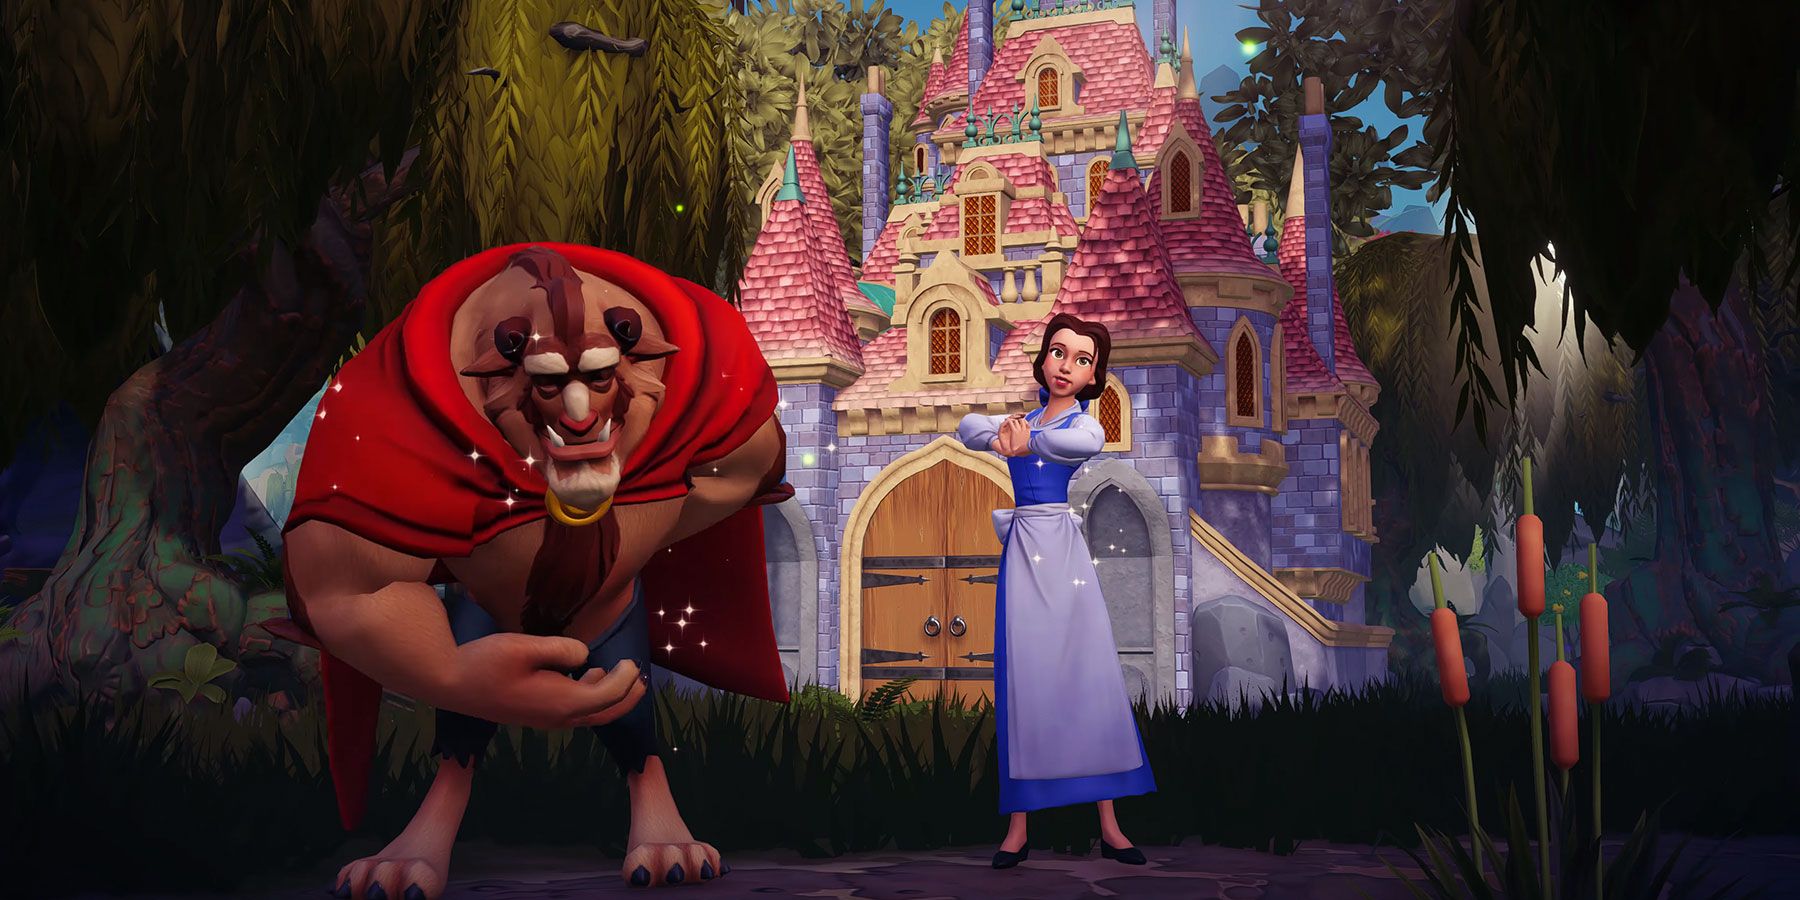 Disney Dreamlight Valley Scraps Free-to-Play Plans, Sets Pricing Tiers